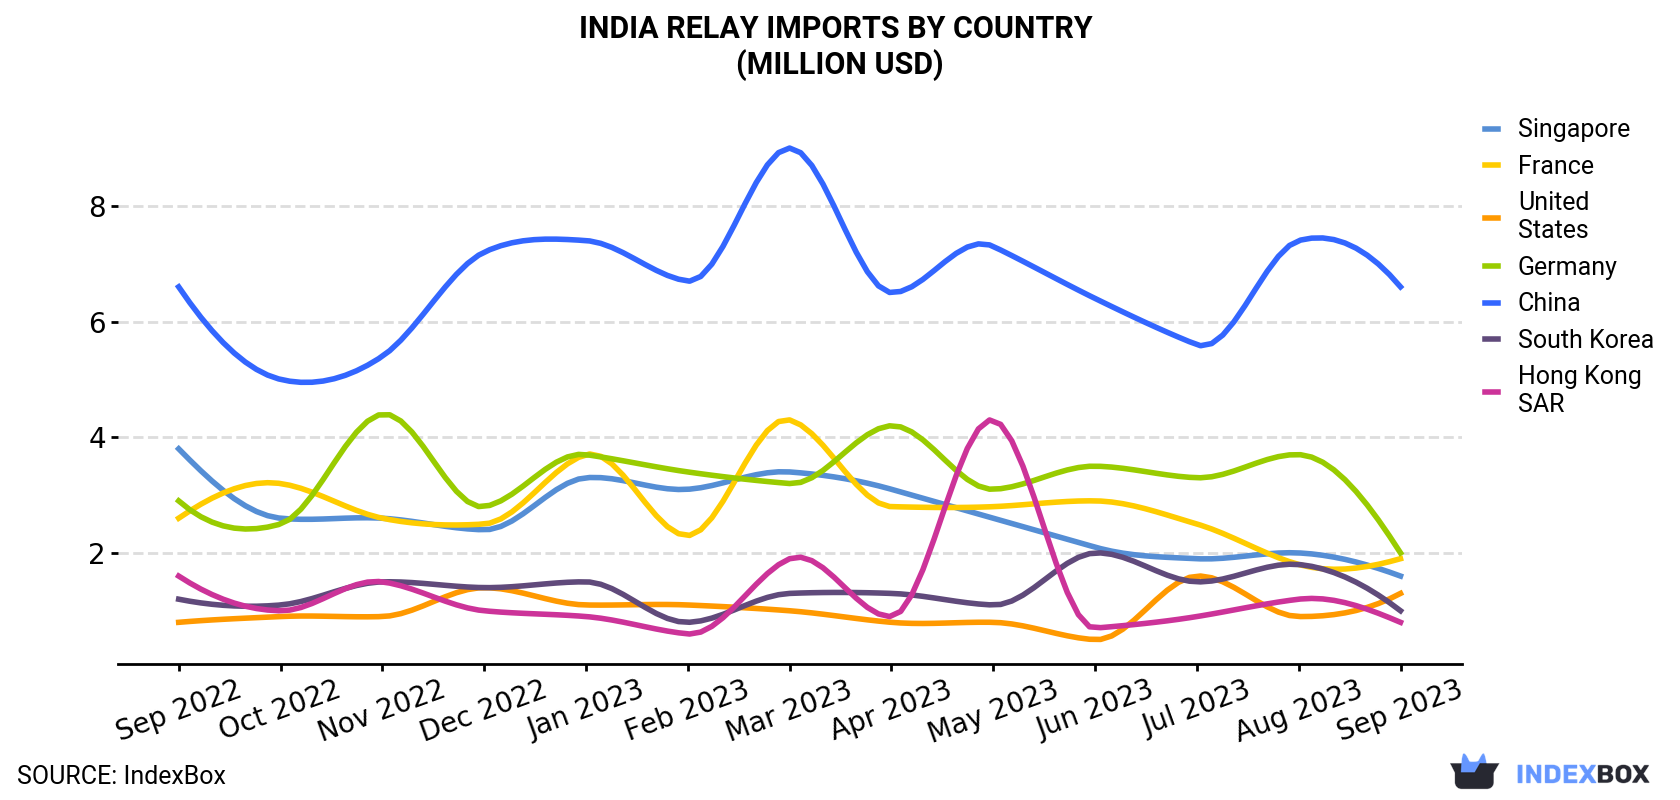 India Relay Imports By Country (Million USD)